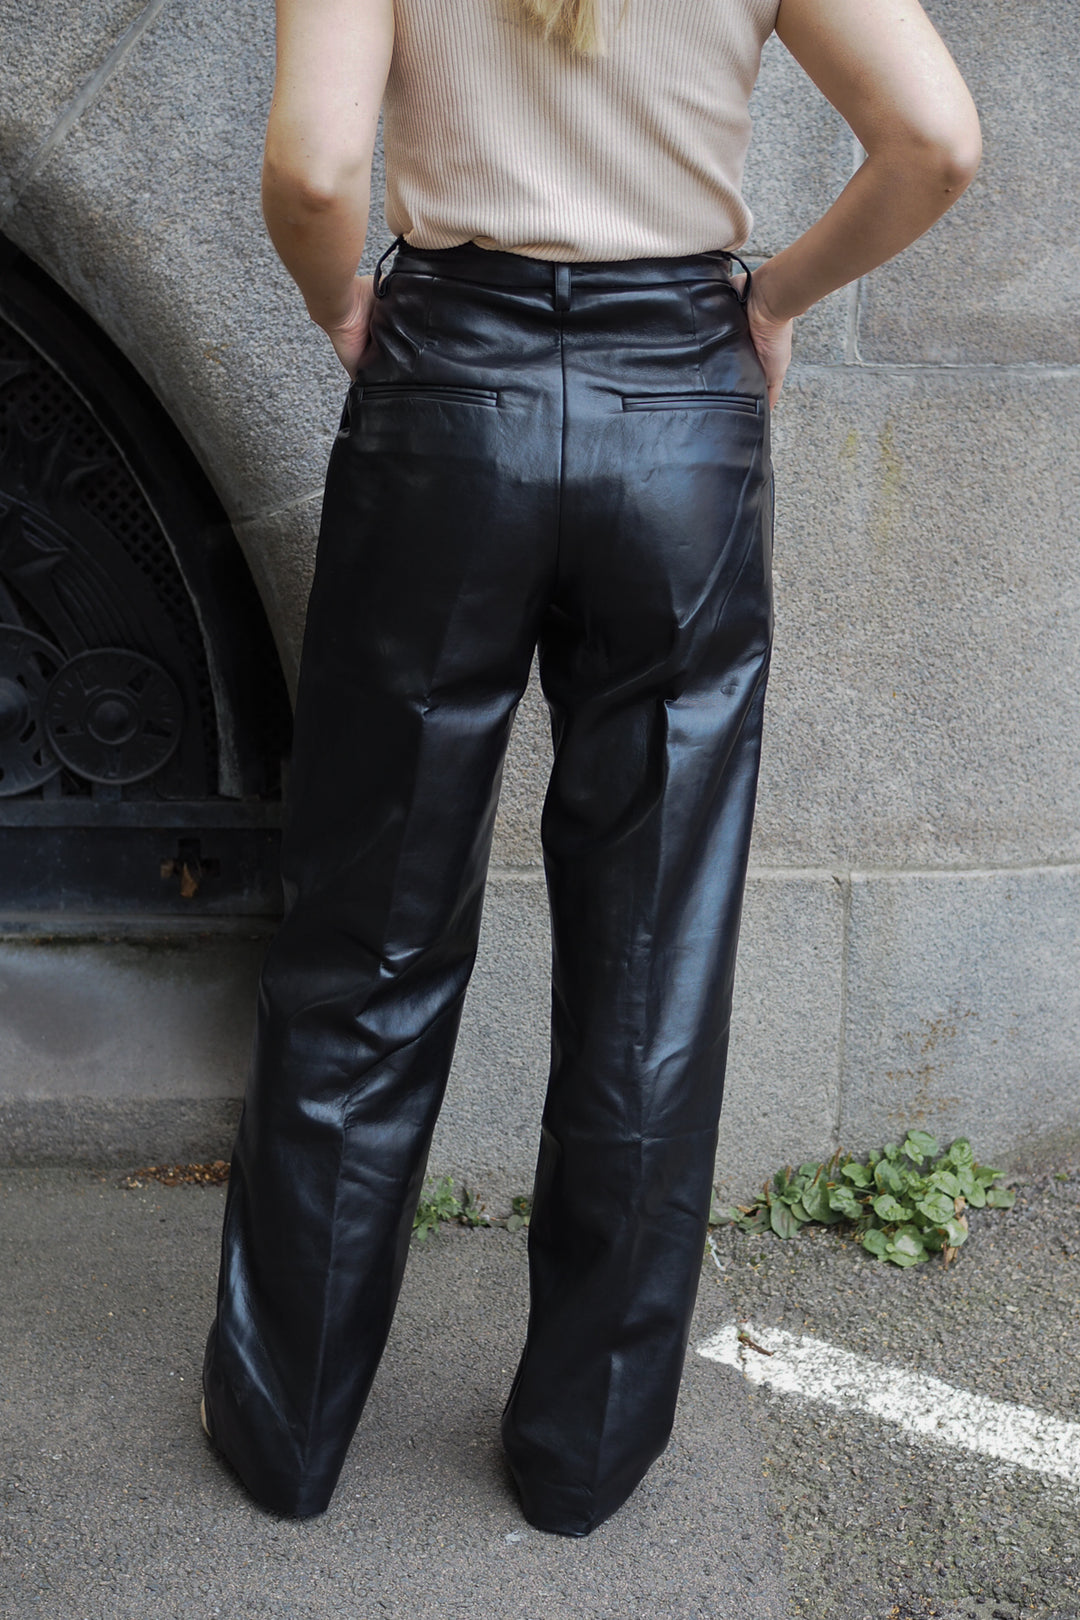 Anine Bing - Carmen Pant Black Recycled Leather